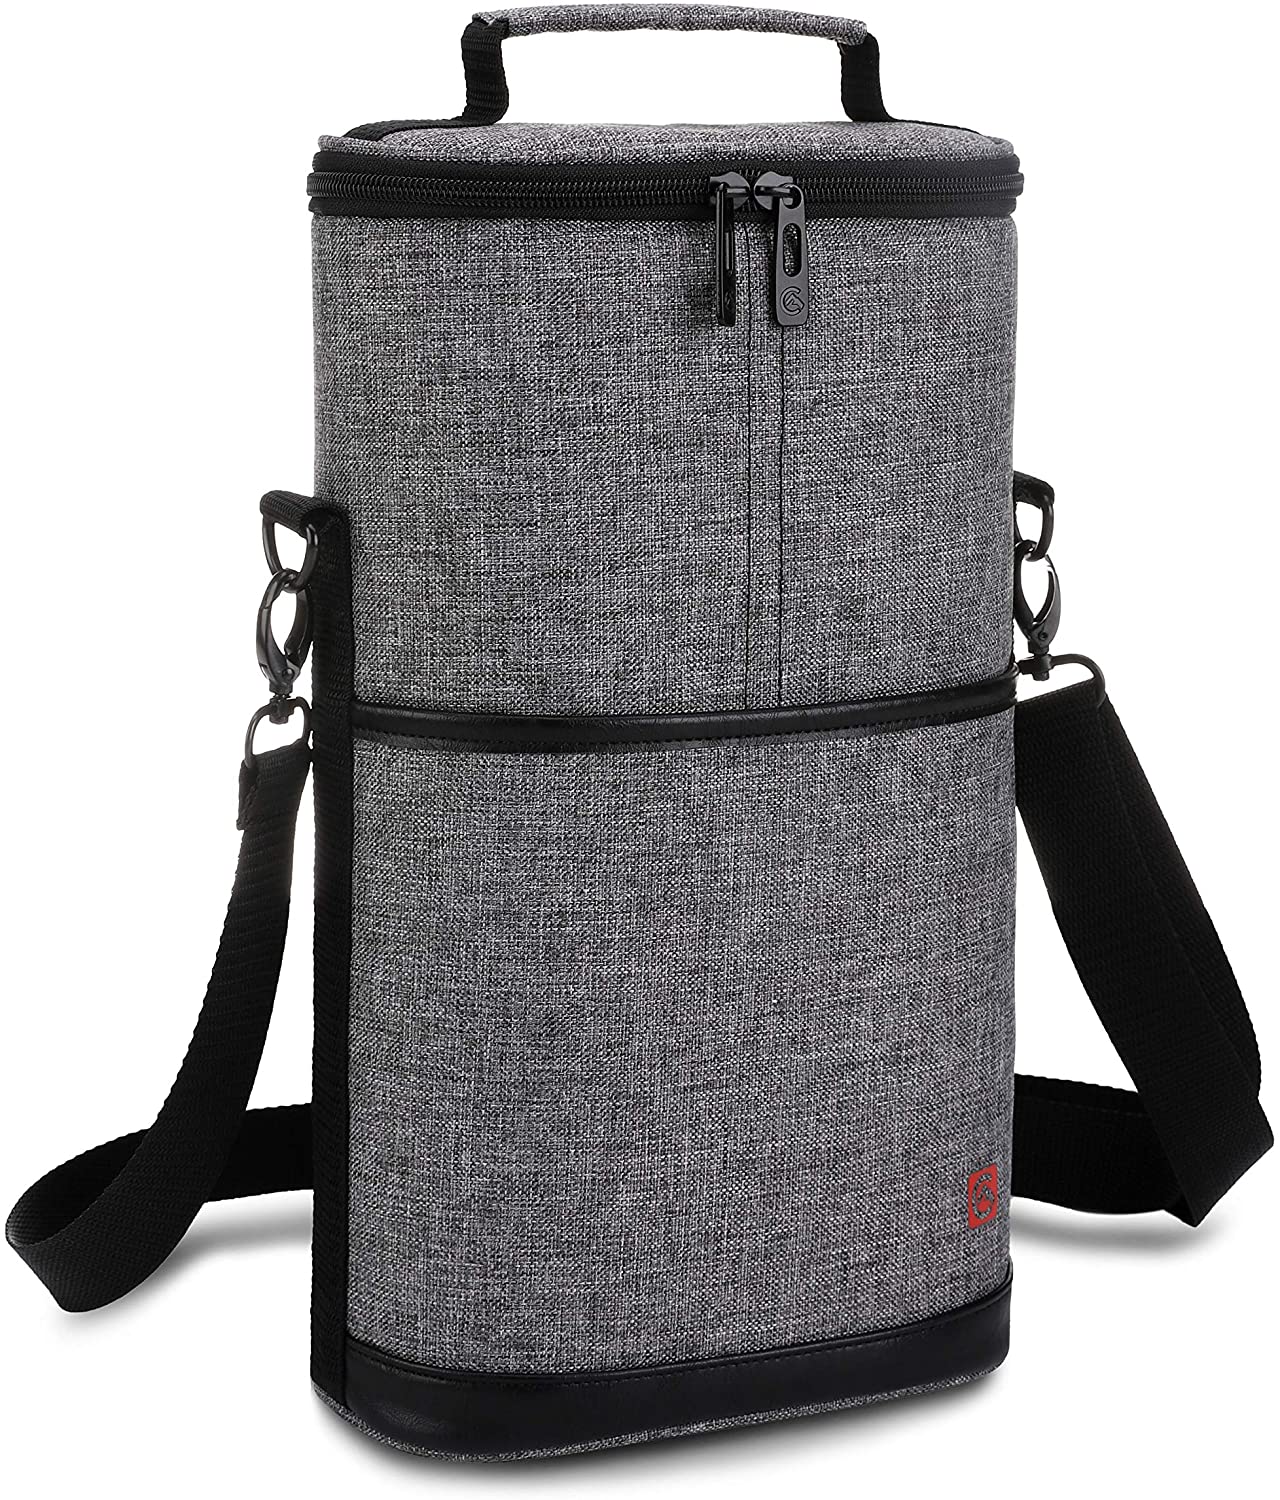 ALLCAMP 2 Bottle Wine Tote Carrier - Insulated Portable Padded Canvas Wine Bag for Travel, BYOB Restaurant, Wine Tasting, Party, Great Christmas Day Gift for Wine Lover?Gray